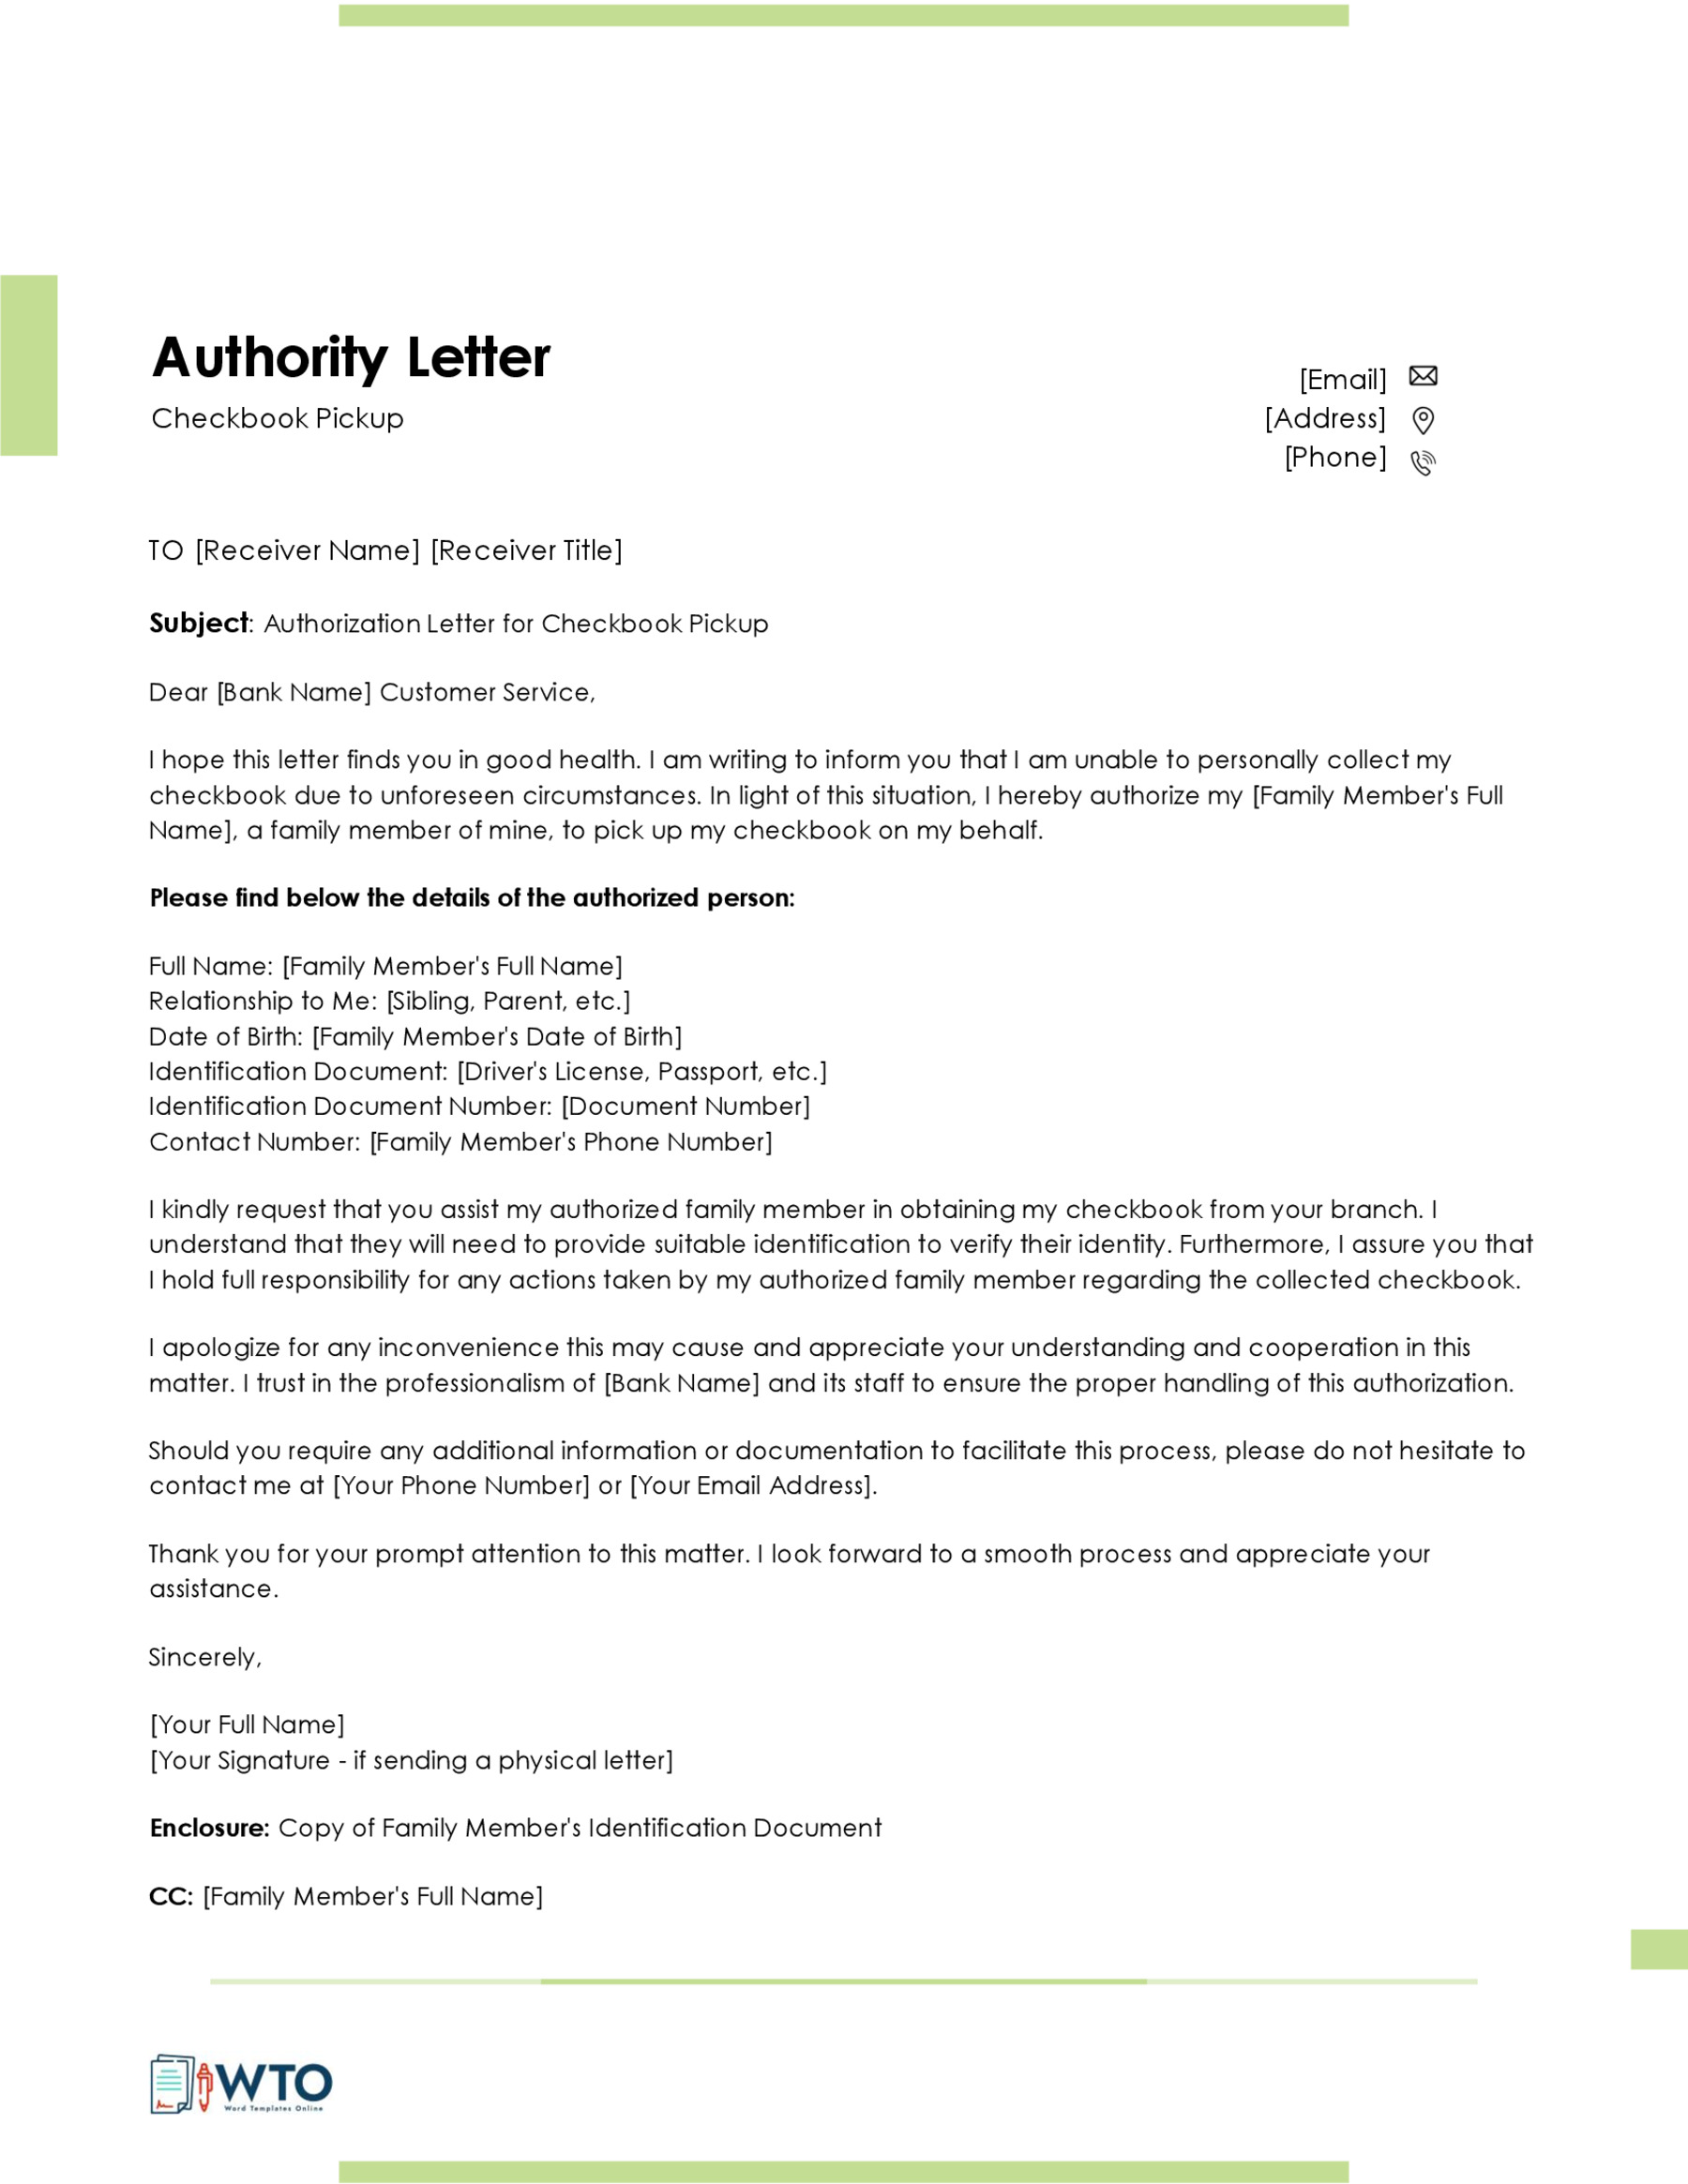 Authorization Letter for Checkbook Pickup Template-Ms Word Free download